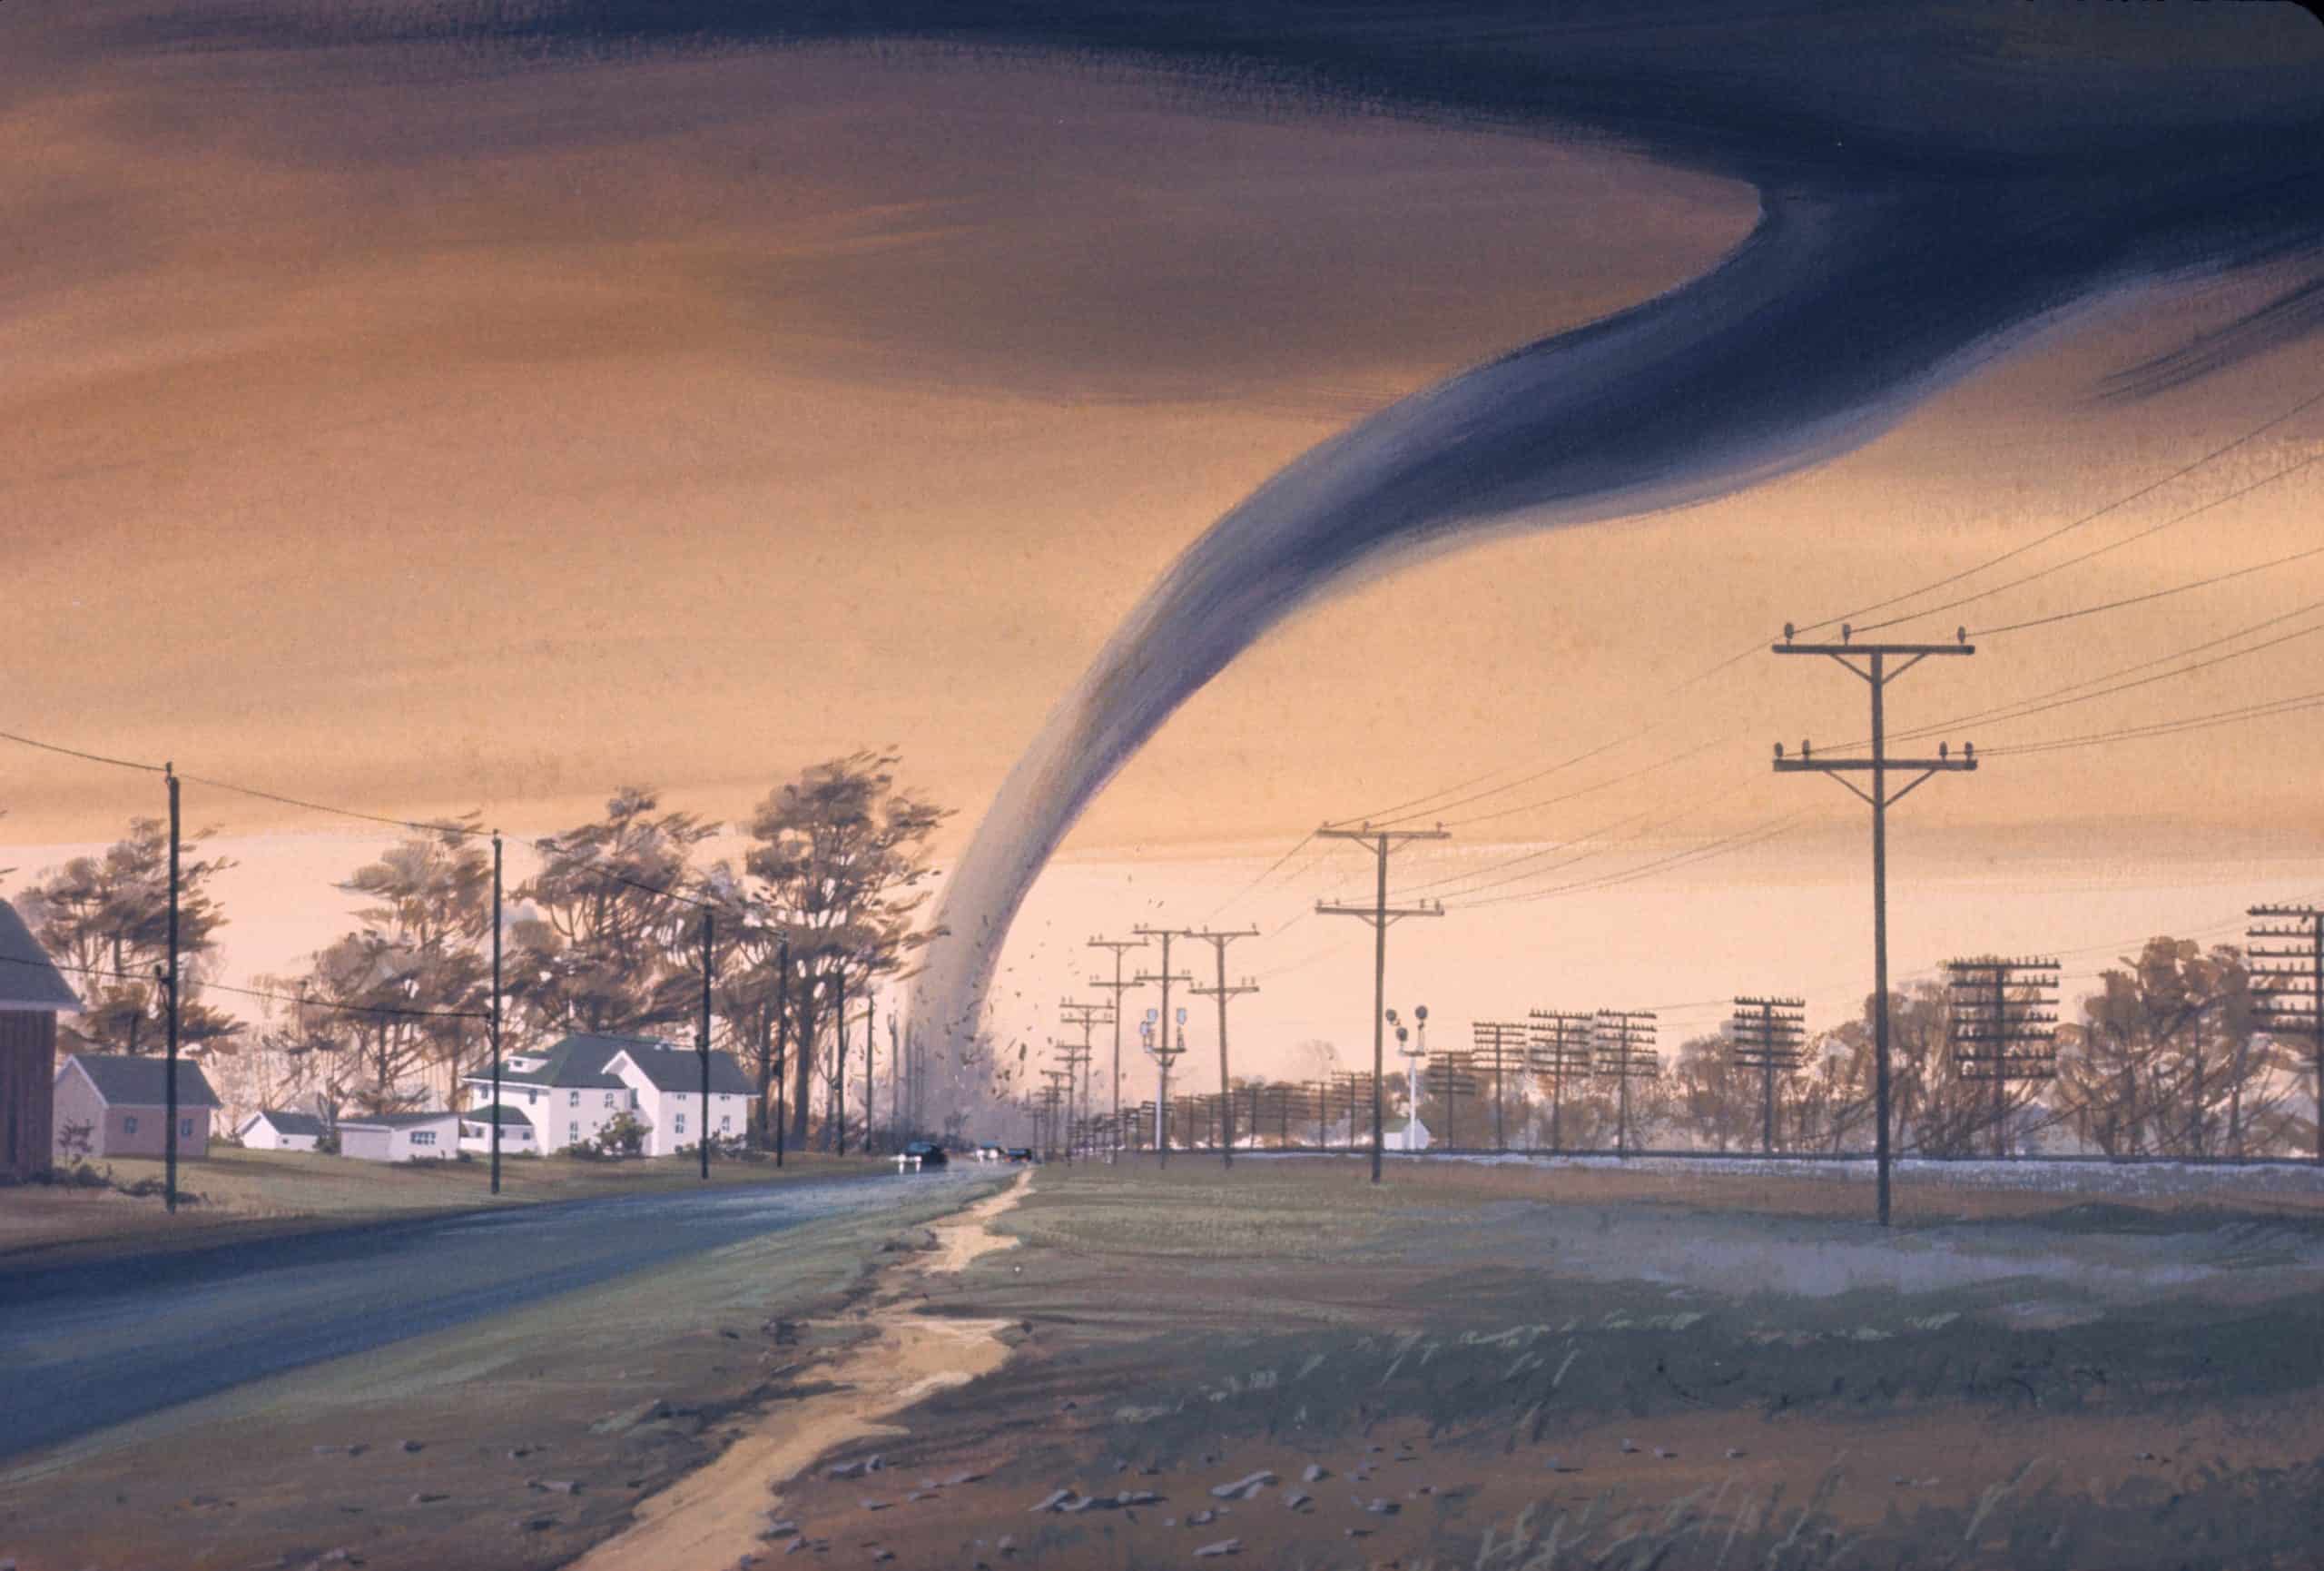 Is Tulsa Considered Part of Tornado Alley?